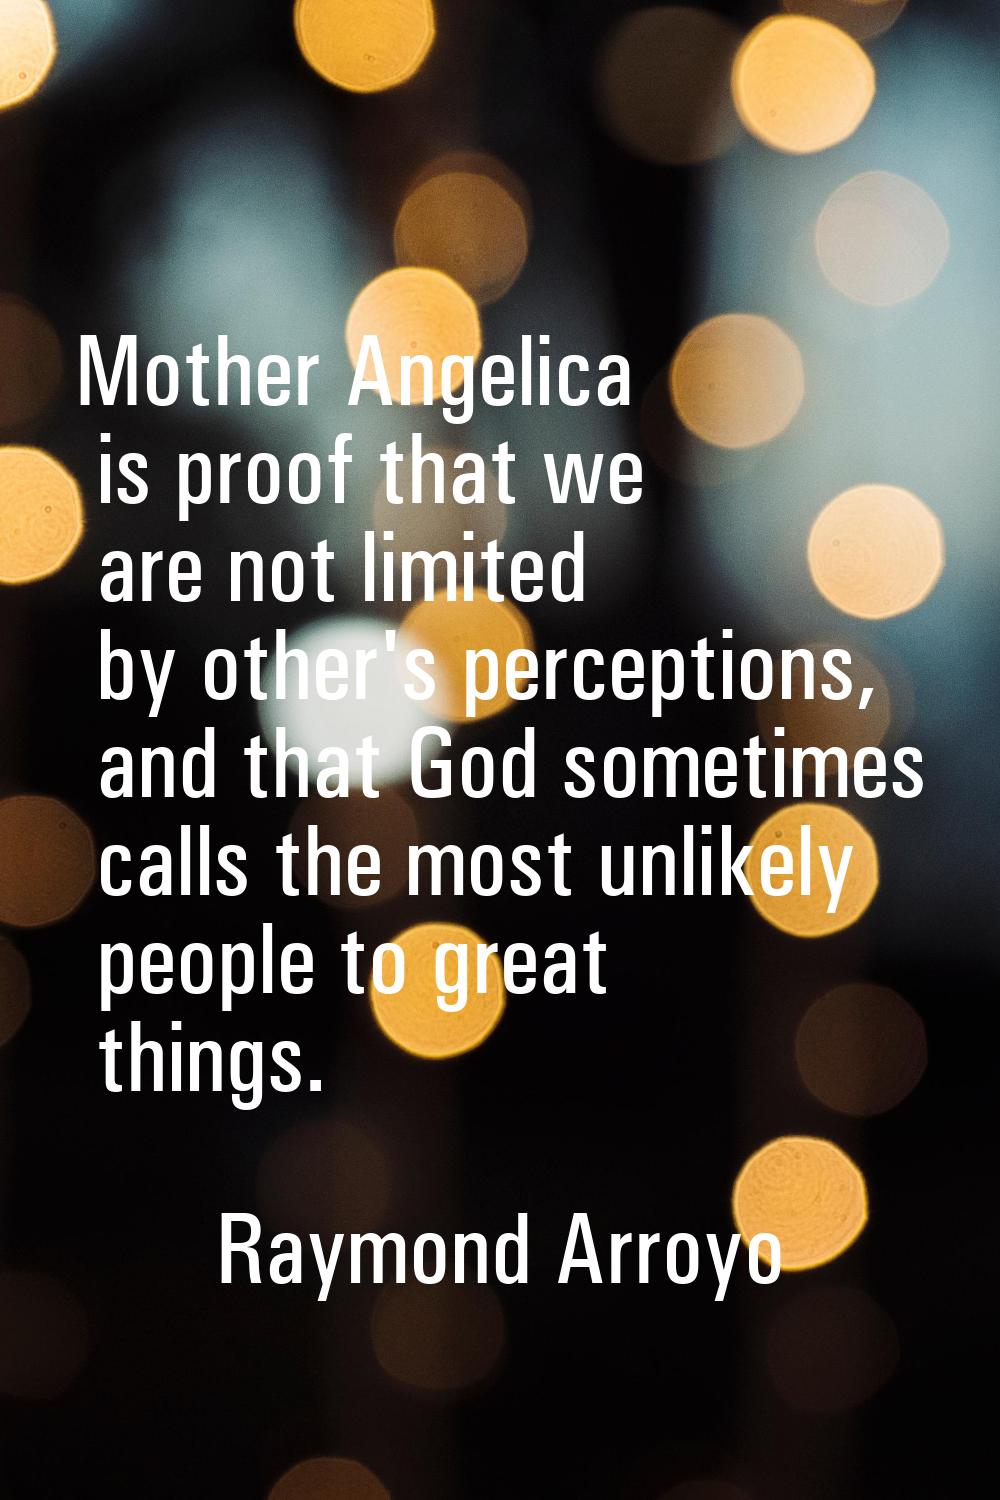 Mother Angelica is proof that we are not limited by other's perceptions, and that God sometimes cal